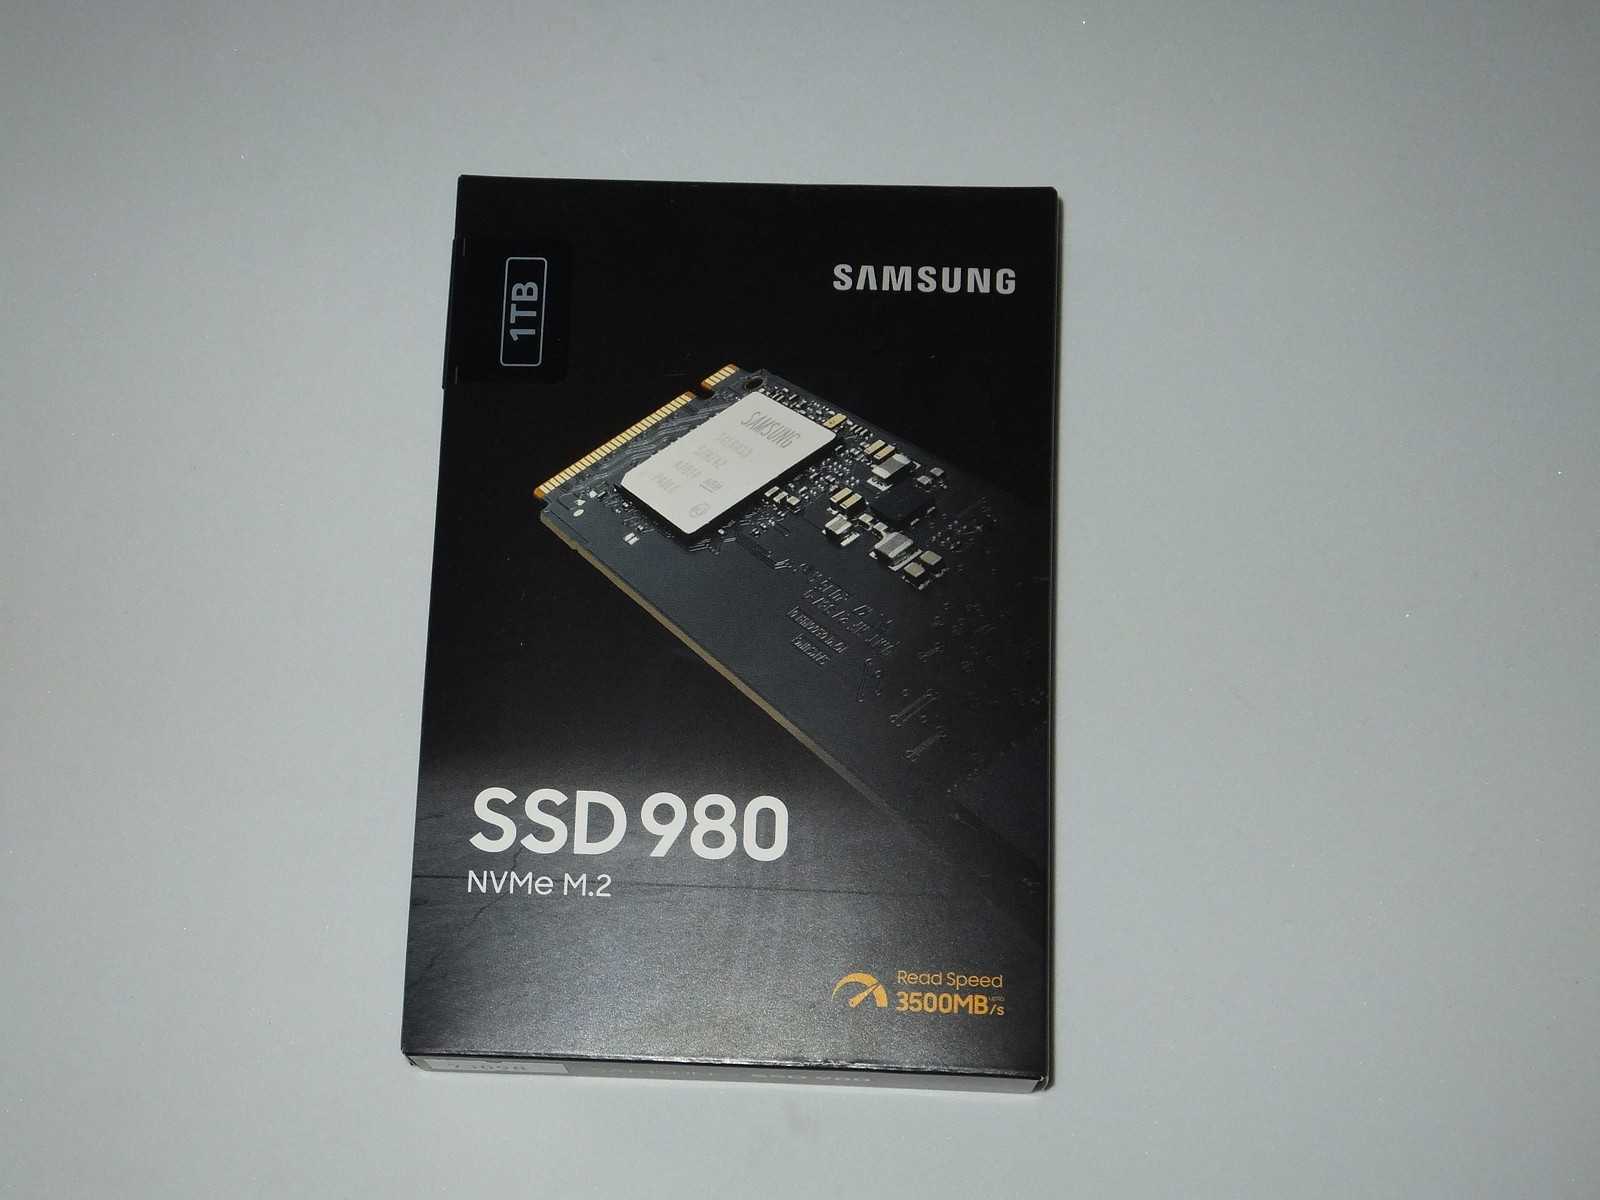 Samsung 980 vs 980 pro: which one should you buy? - ssd sphere